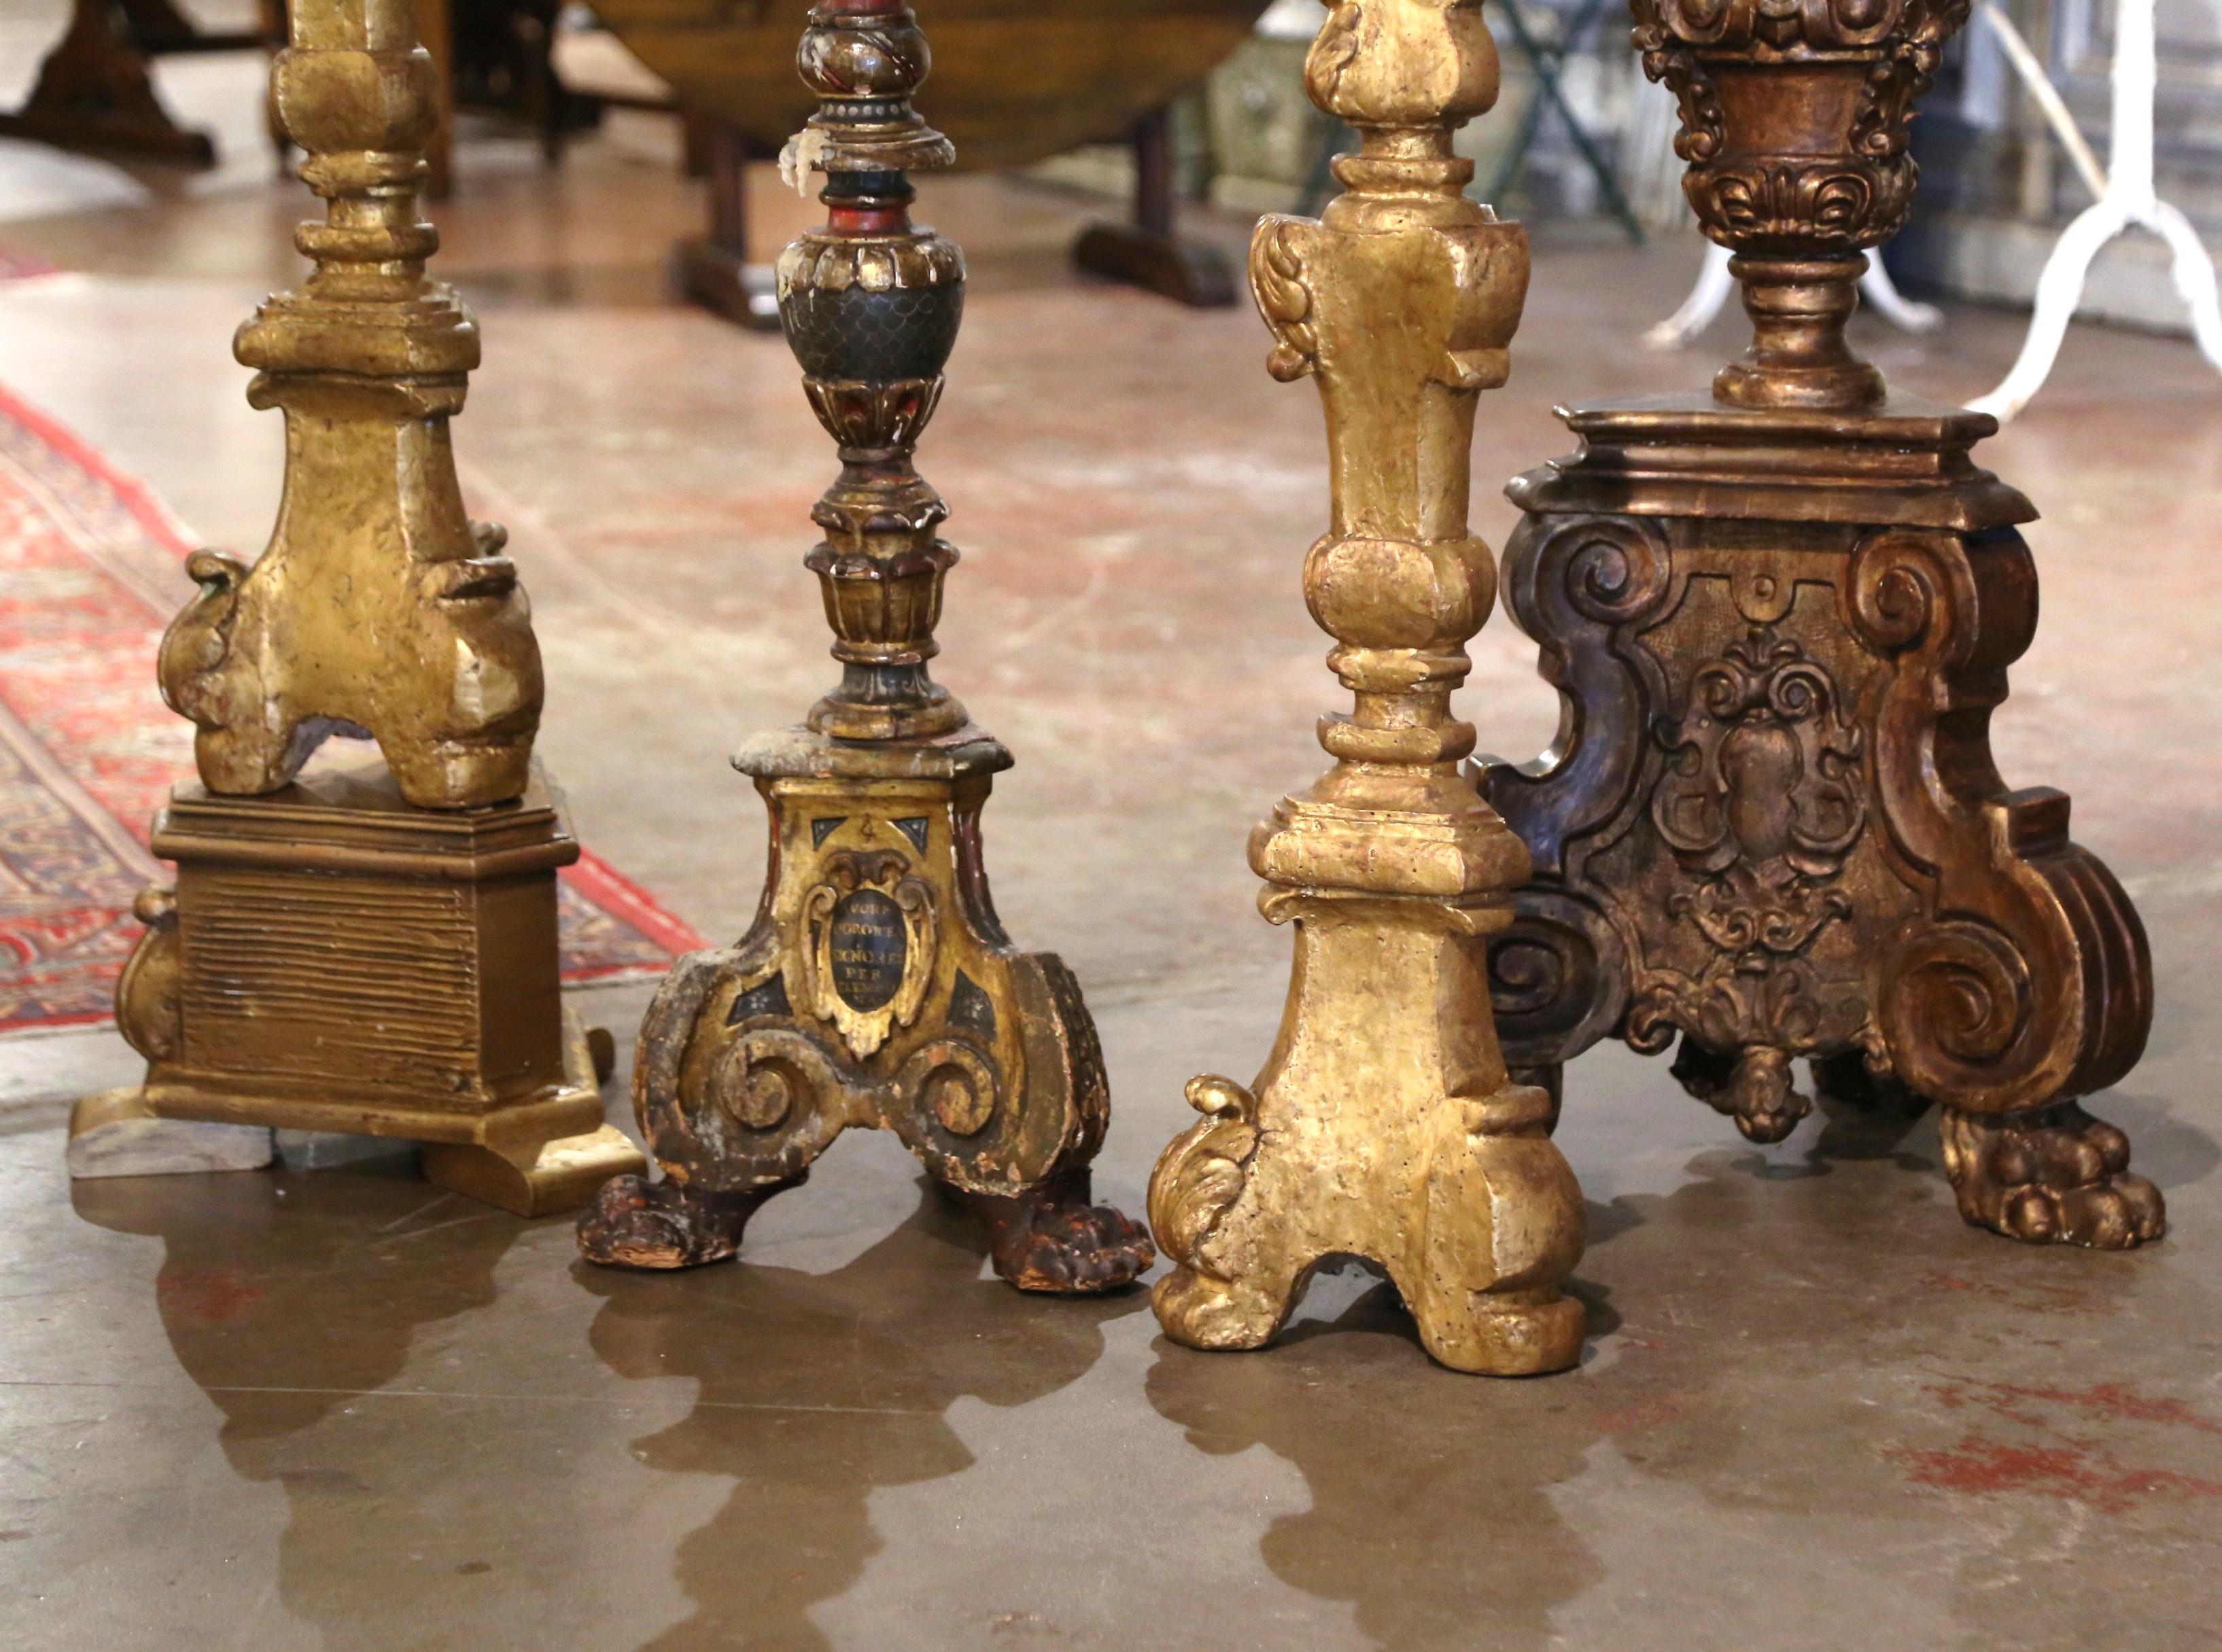 Add an air of drama and elegance to your home with this important suite of tall antique candlesticks. Crafted in Italy circa 1860, each candle holder stands on a sturdy triangle base decorated with hand carved angel faces over three paw feet with